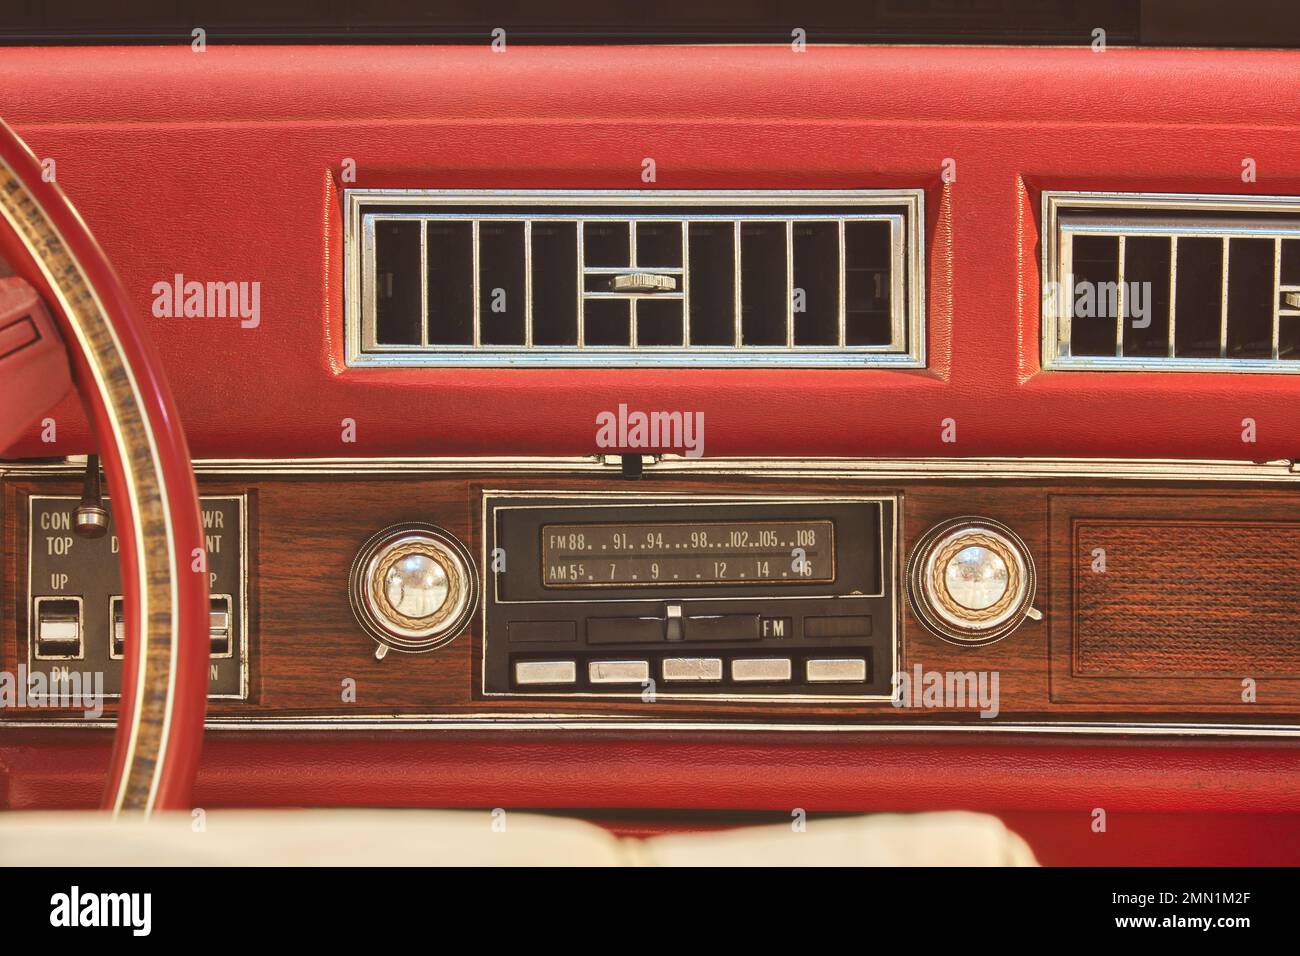 Old car radio inside a red classic American car with chrome and wooden dashboard Stock Photo